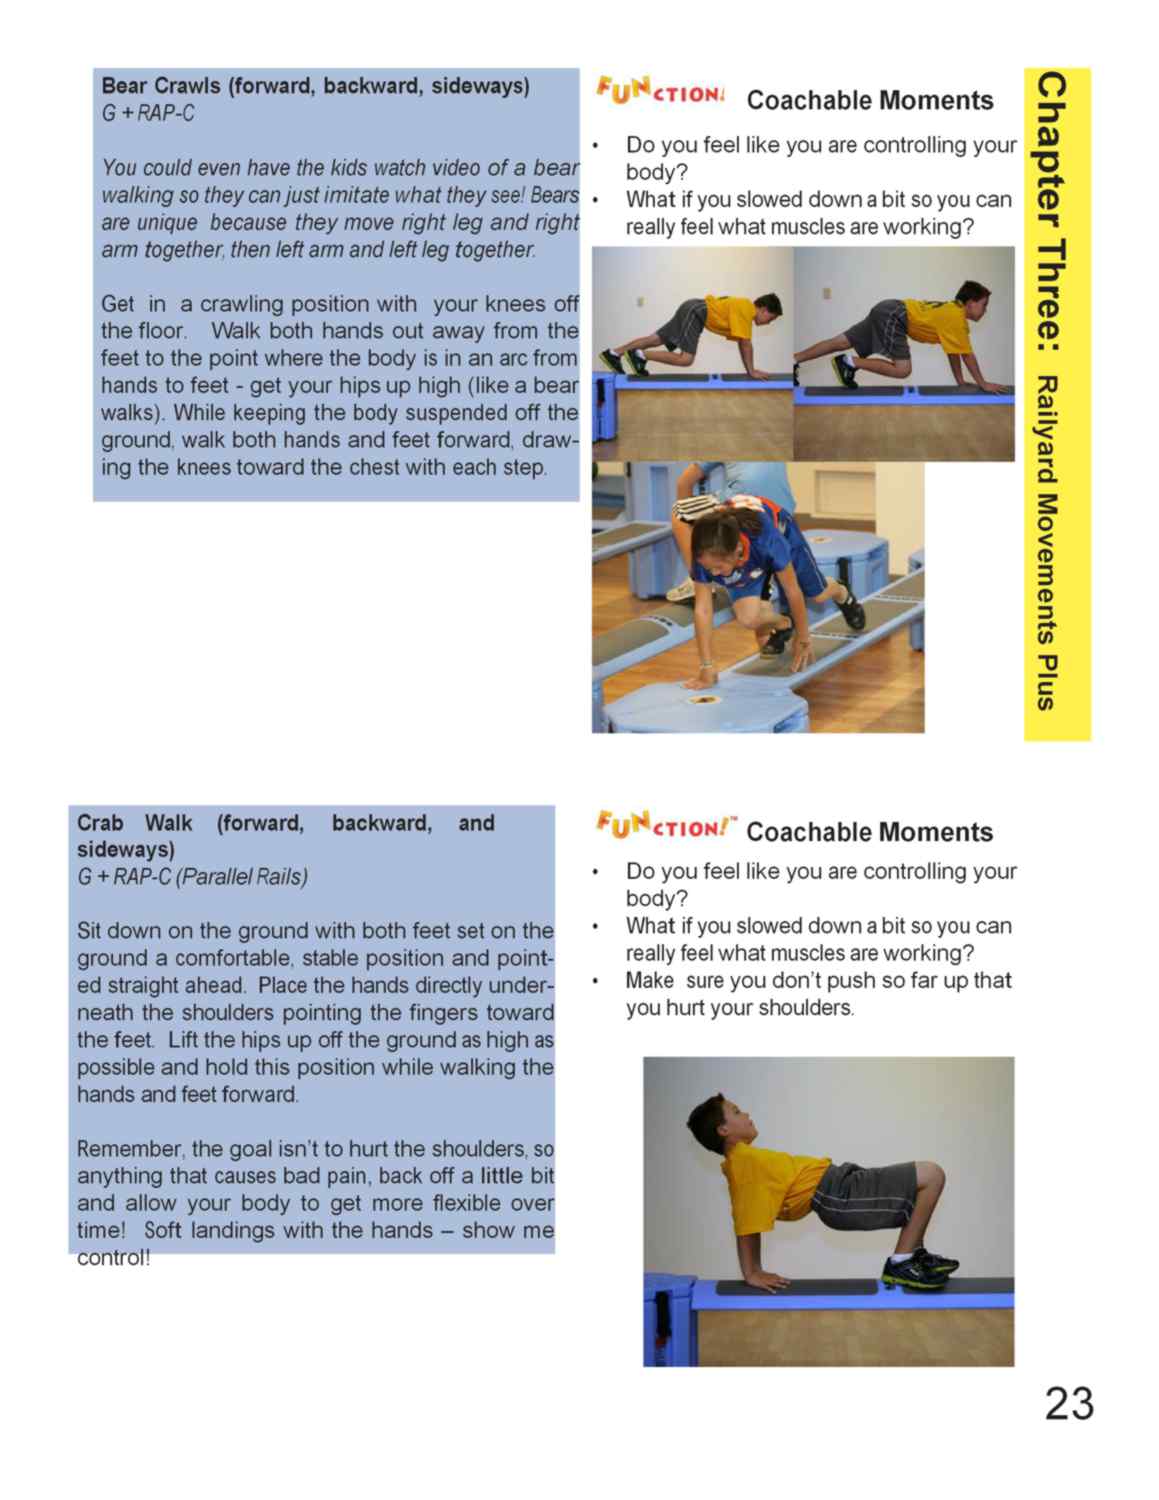 49 Exercises & Active-Play Youth Training Manual - Railyard Fitness